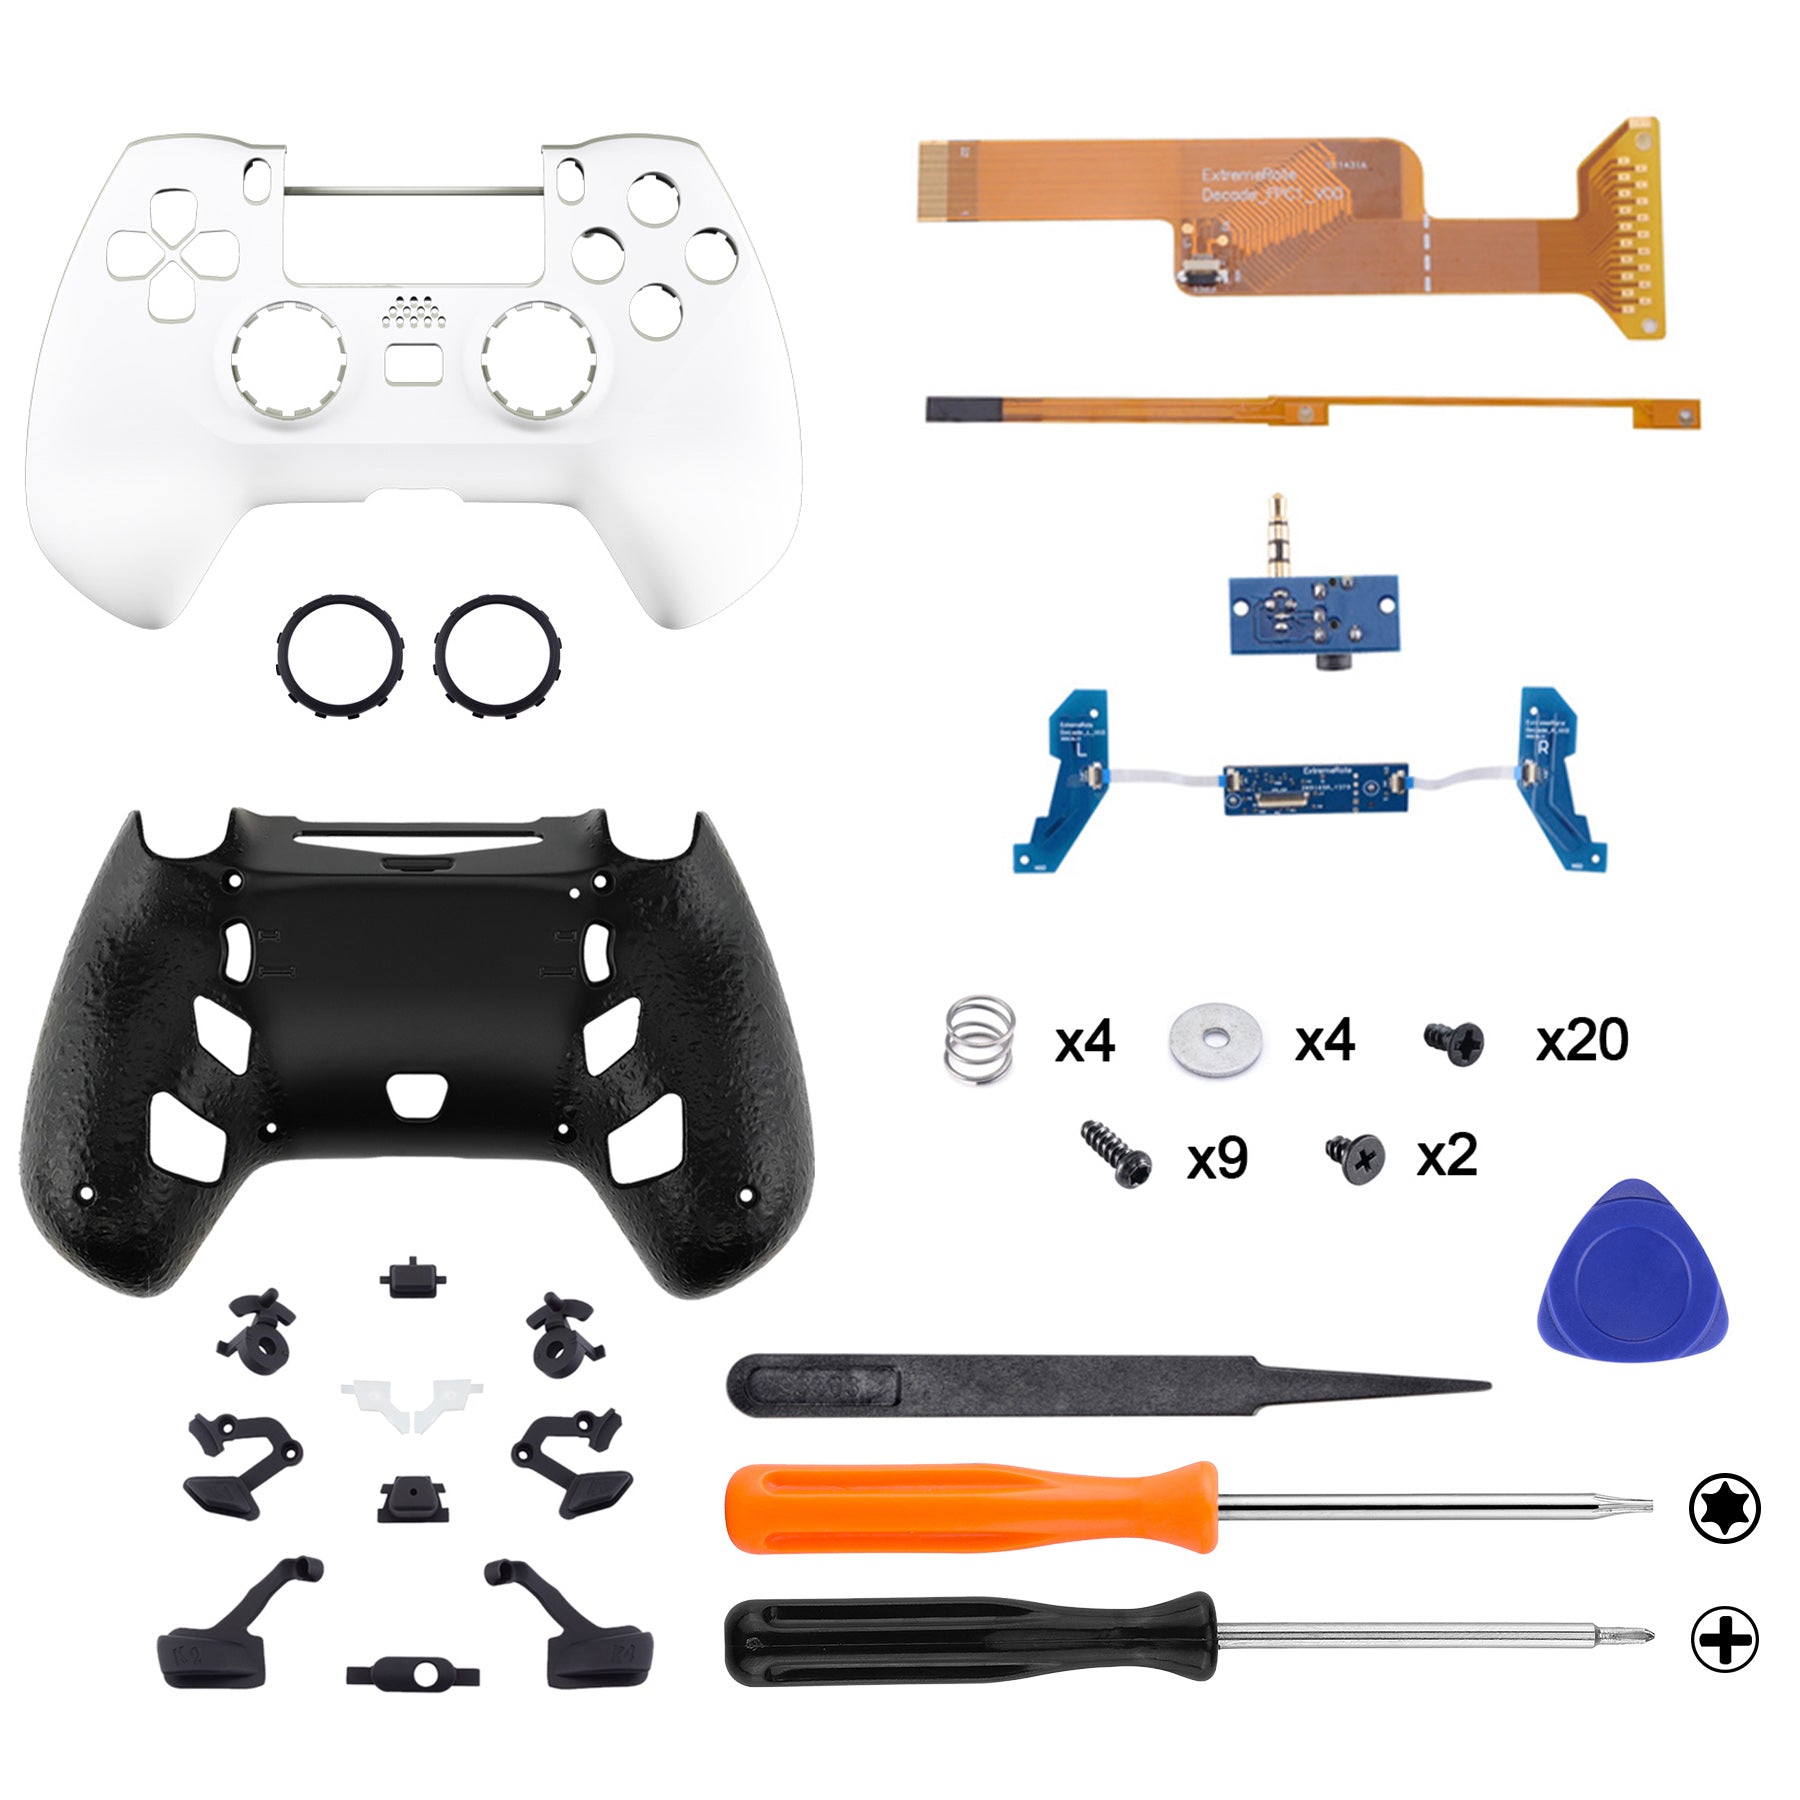 eXtremeRate DECADE Tournament Controller (DTC) Upgrade Kit for PS4  Controller JDM-040/050/055 - White